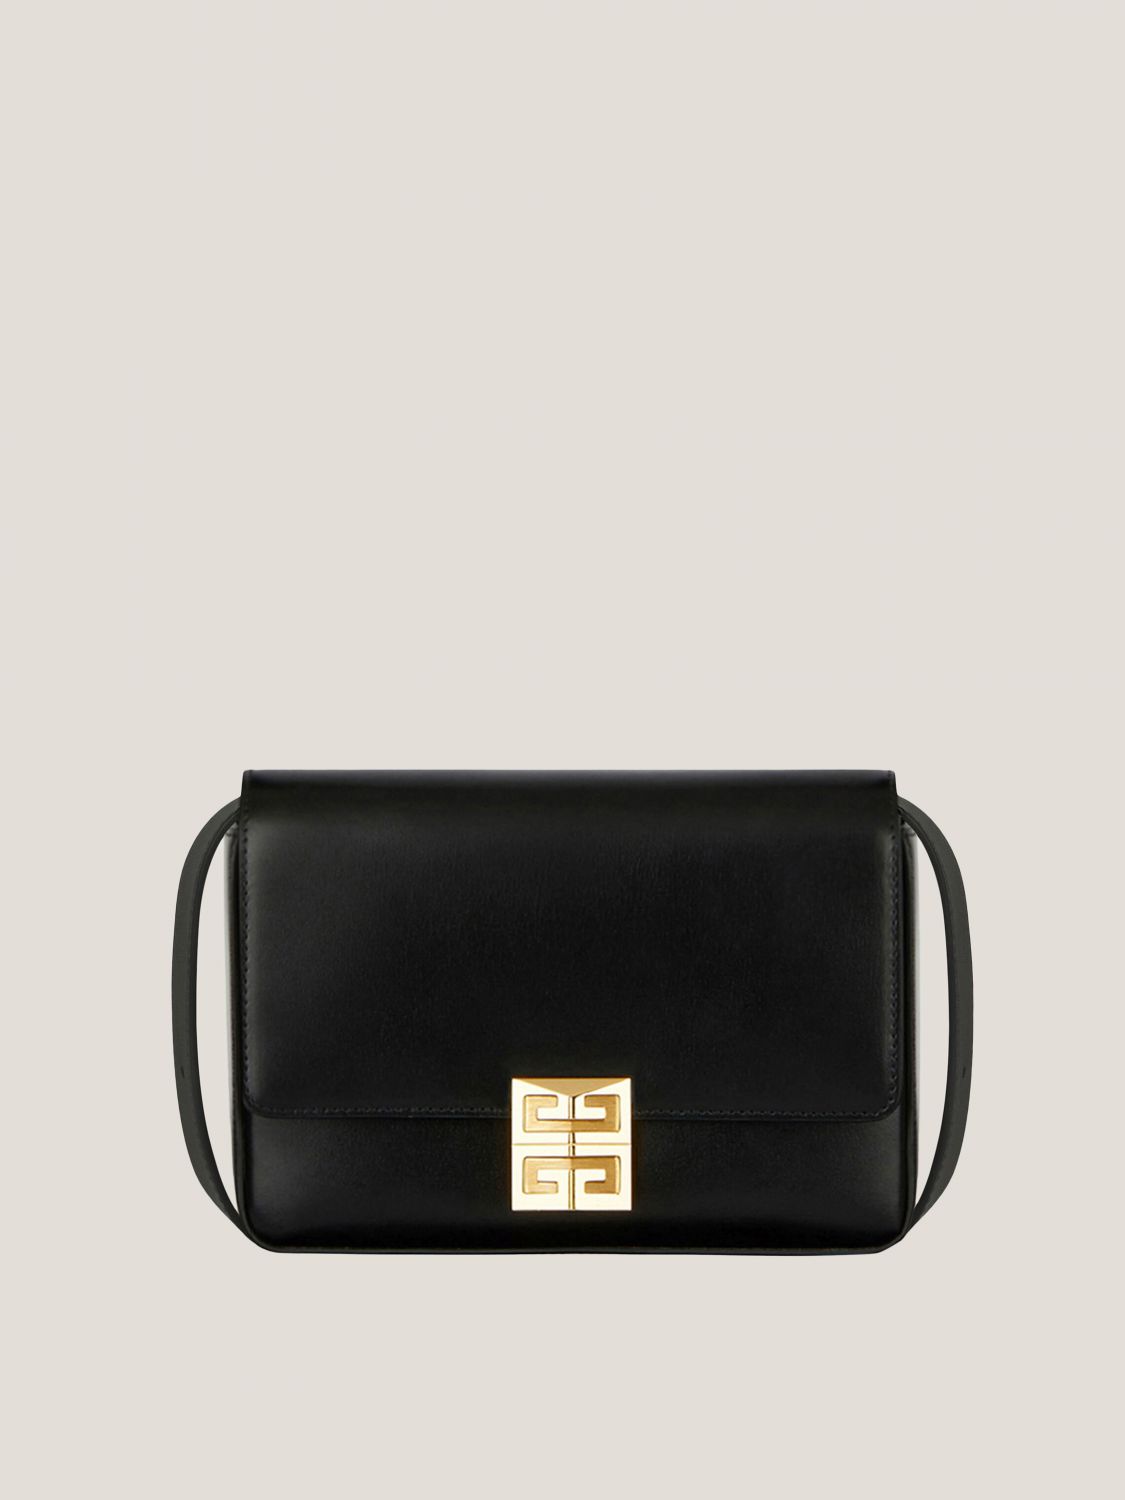 GIVENCHY: 4G bag in box leather | Crossbody Bags Givenchy Women Black ...